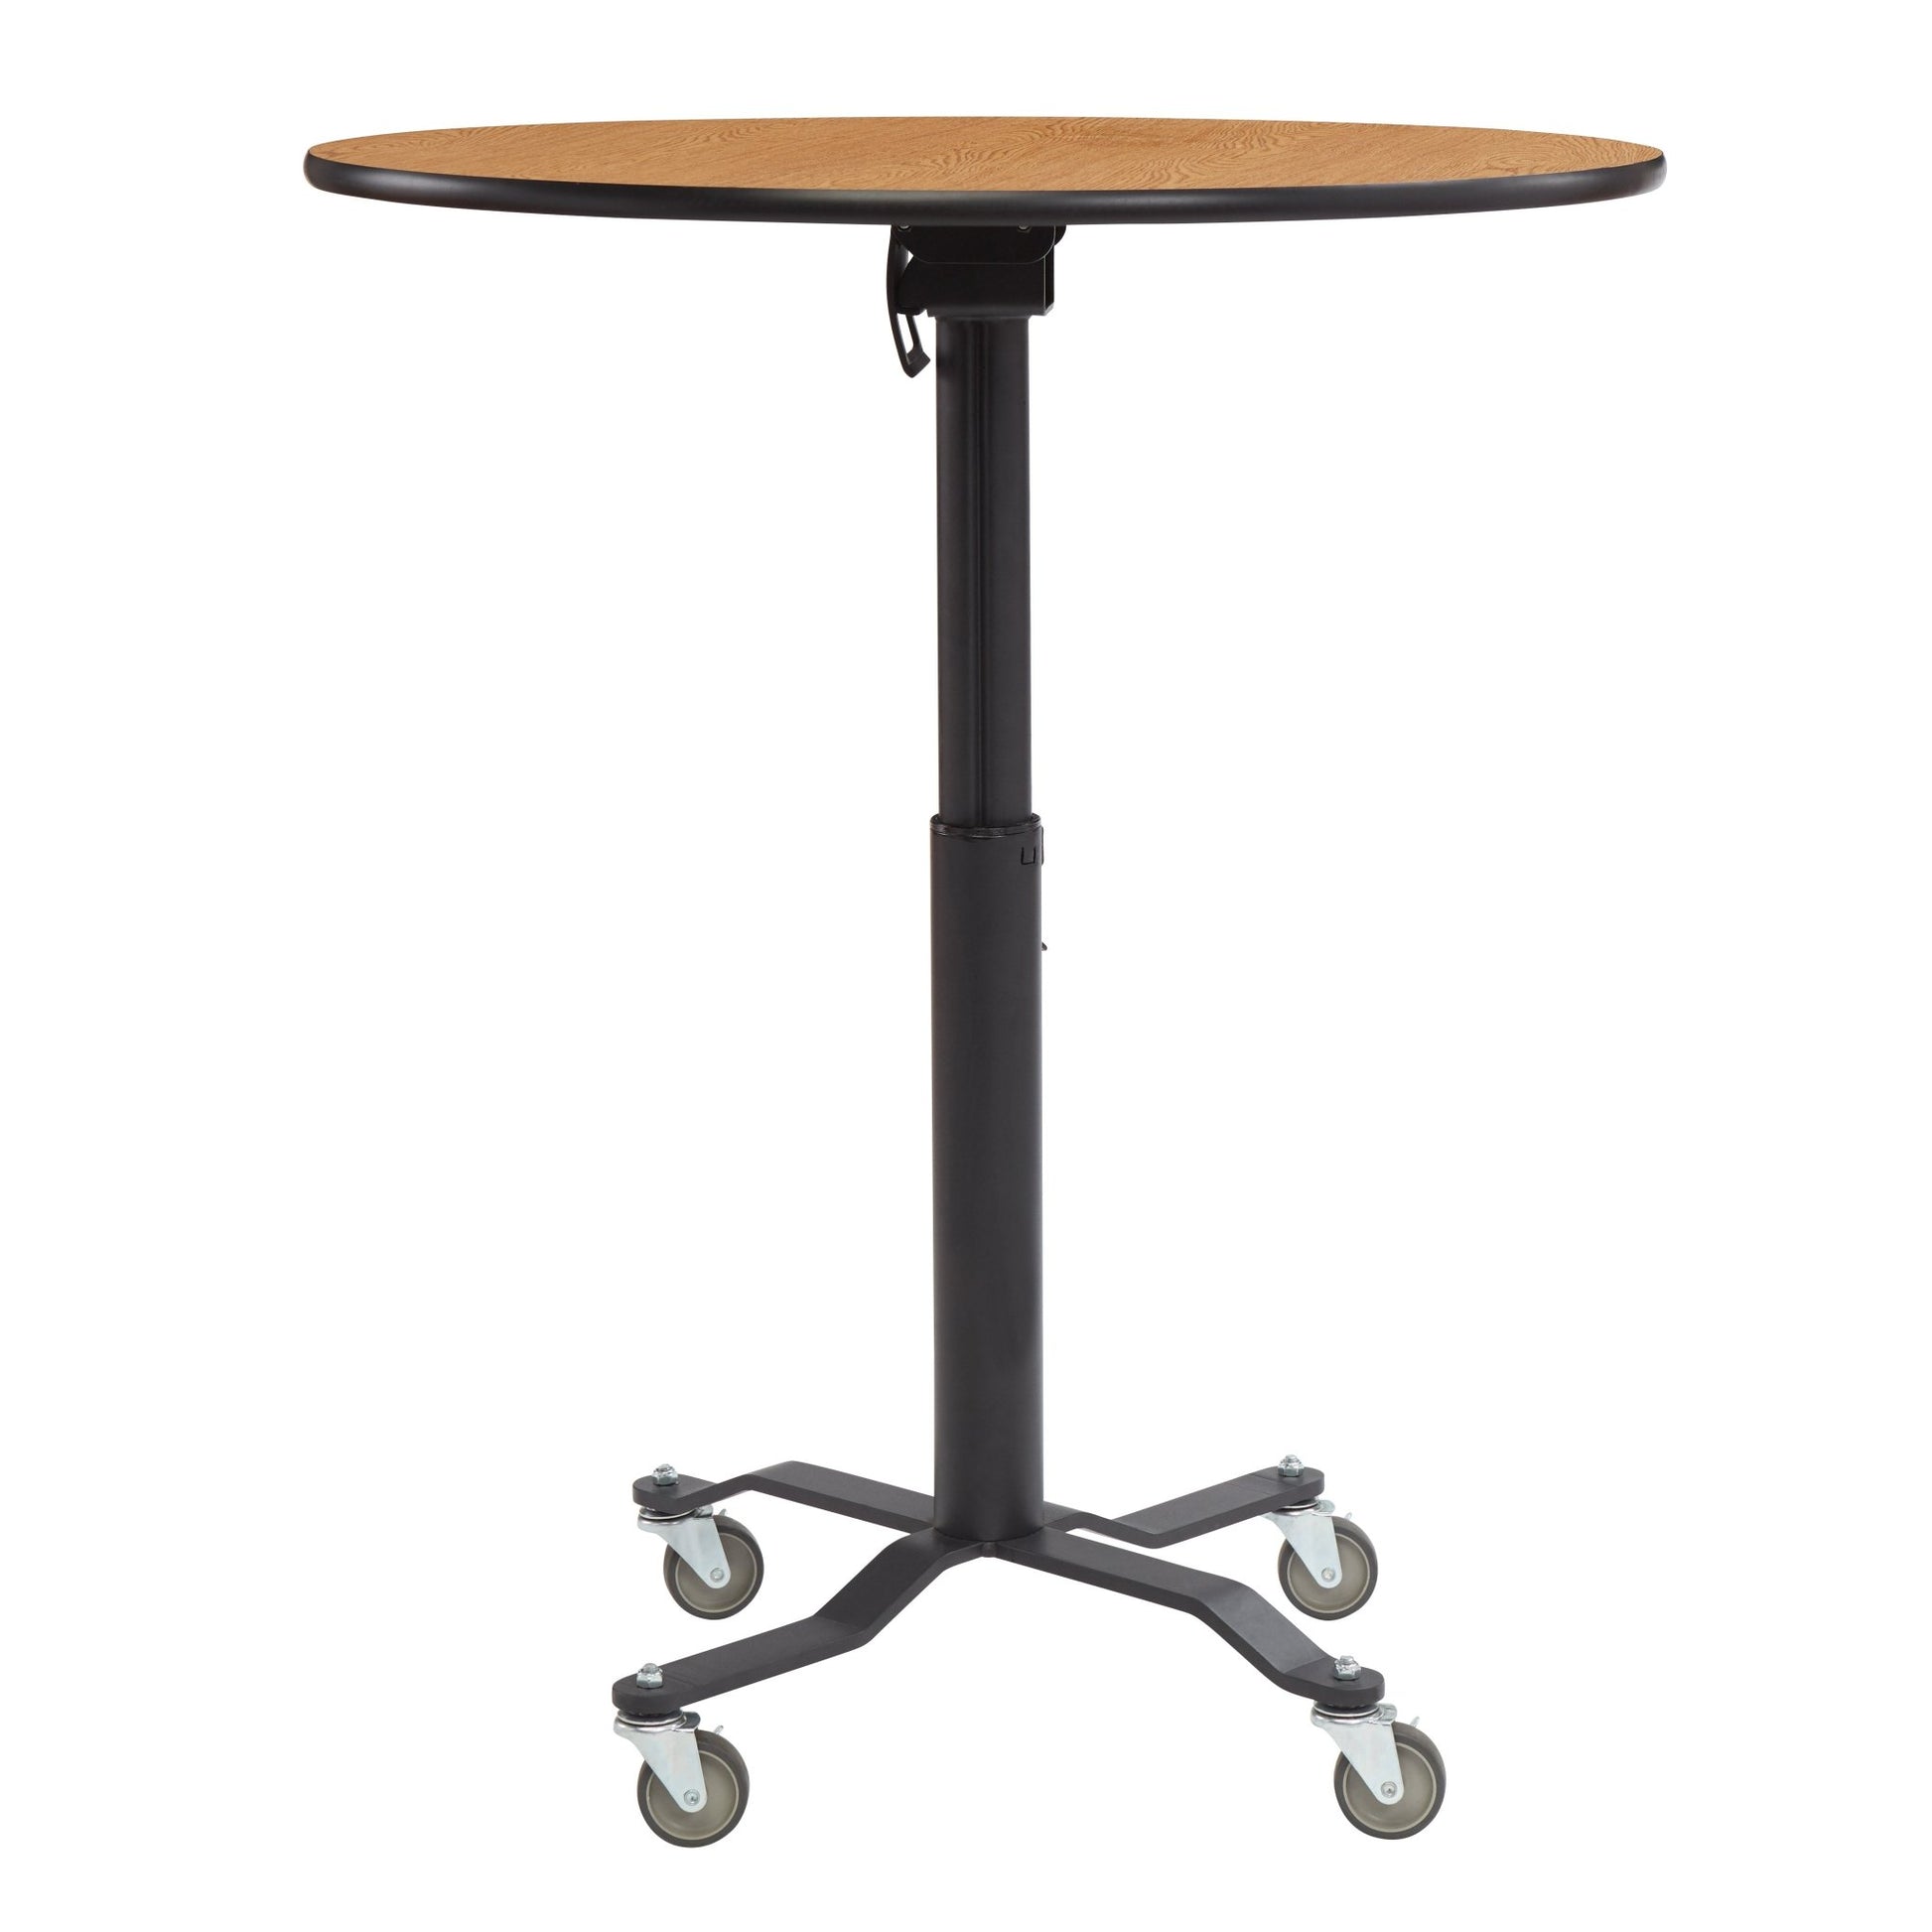 NPS Cafe Time II Table, 30" Round, High Pressure Laminate Top, Particle Board, Vinyl T-Molding (National Public Seating NPS-PCT130PBTM) - SchoolOutlet